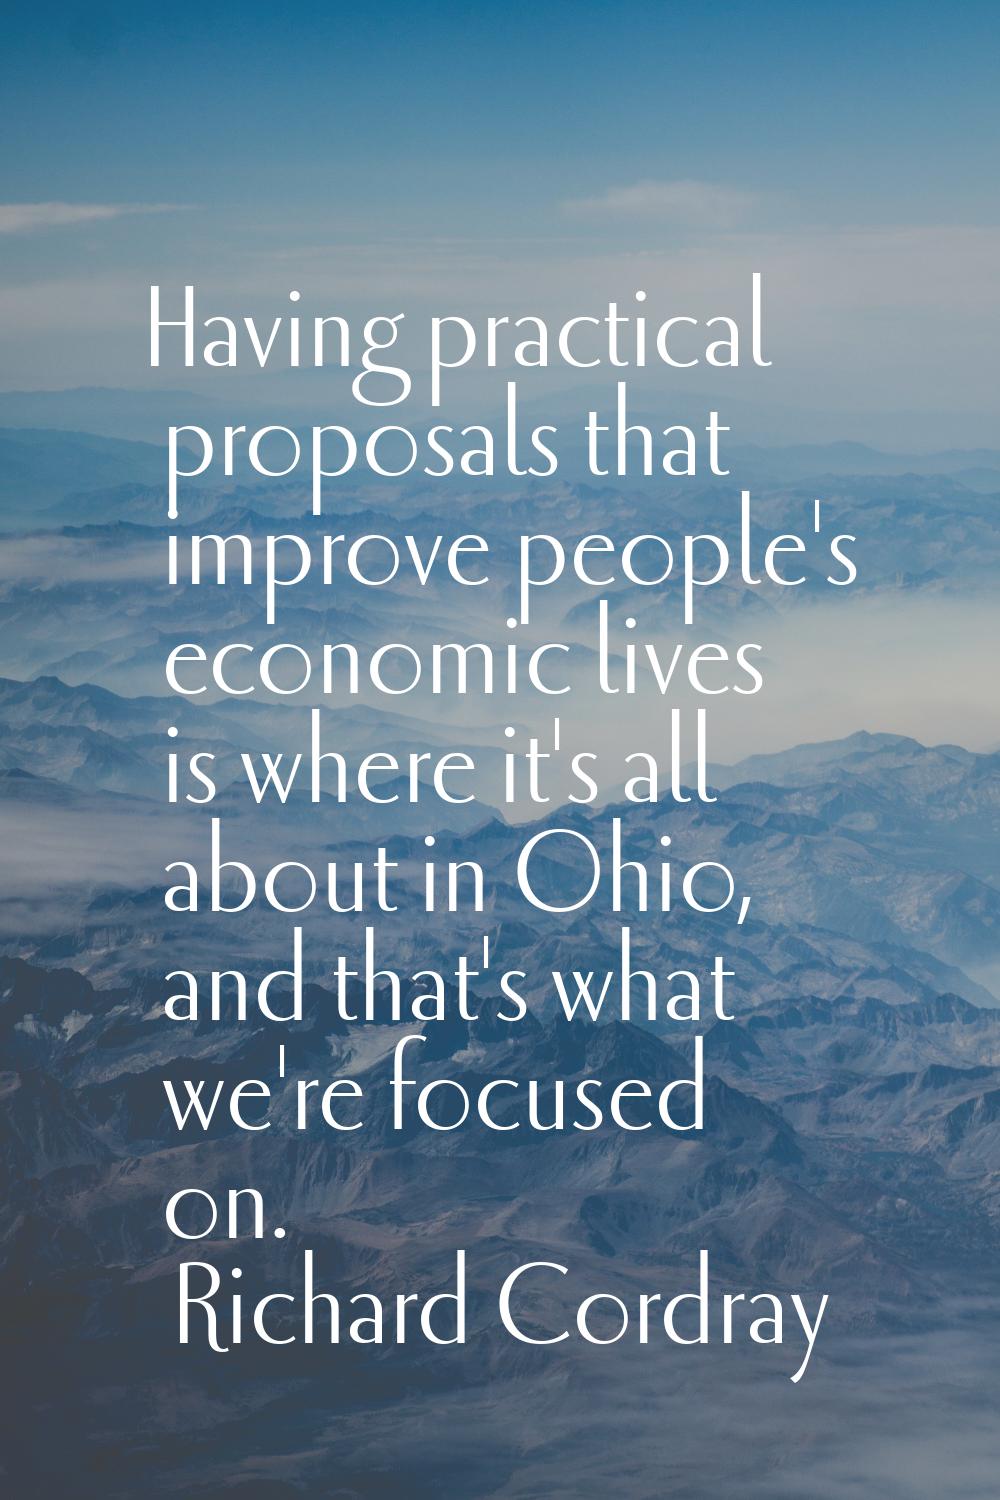 Having practical proposals that improve people's economic lives is where it's all about in Ohio, an